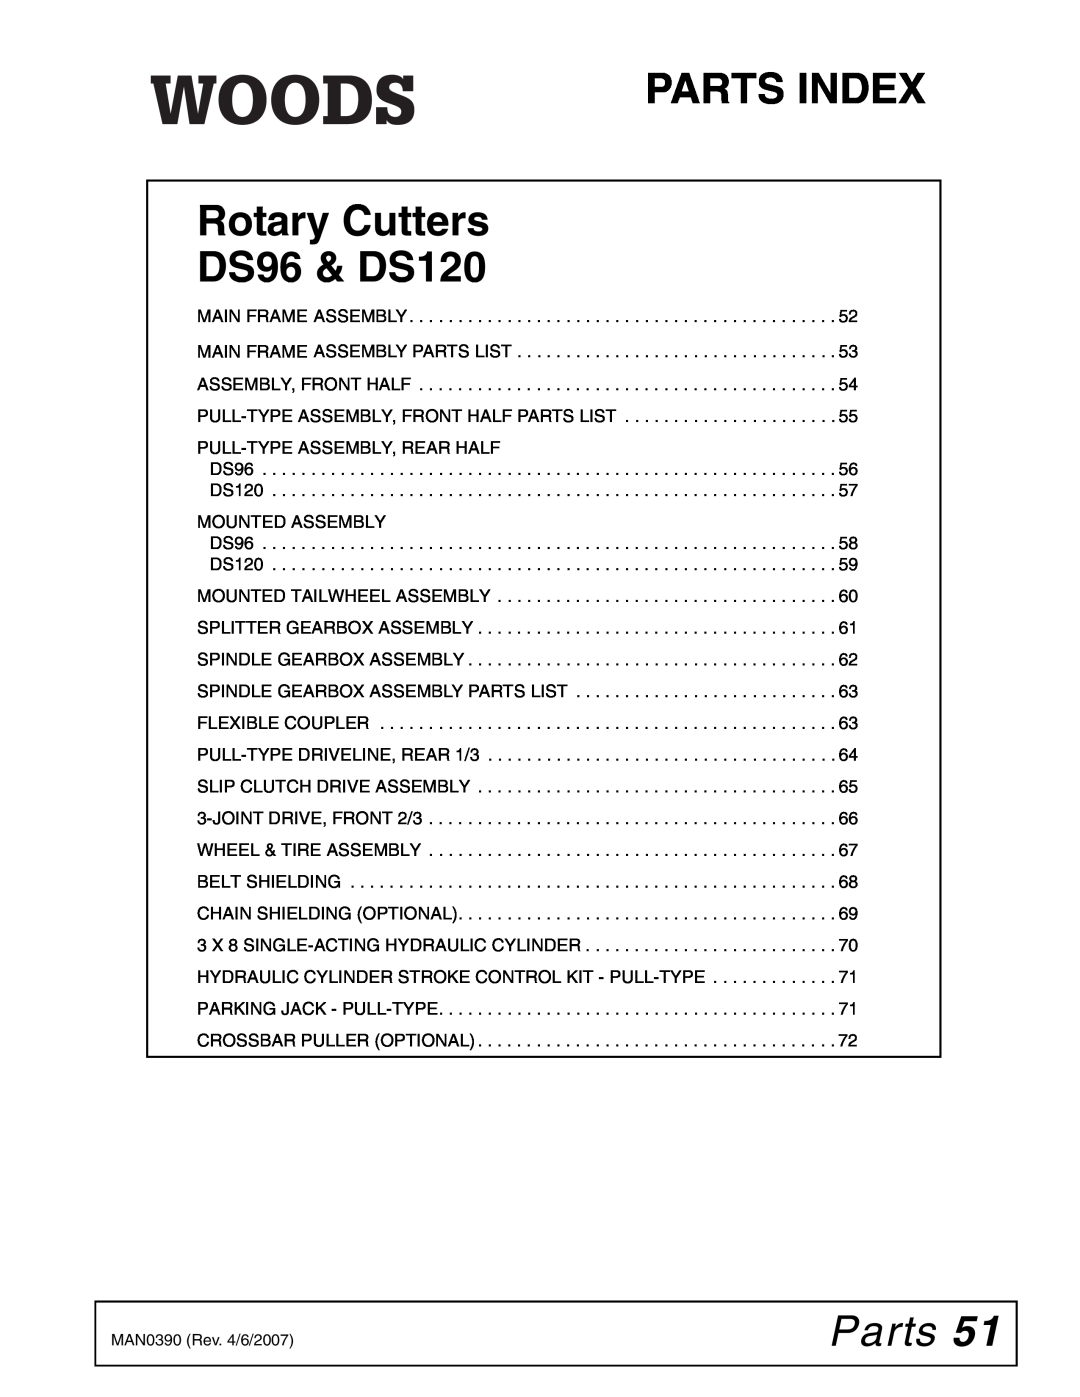 Woods Equipment manual Parts, PARTS INDEX Rotary Cutters DS96 & DS120 